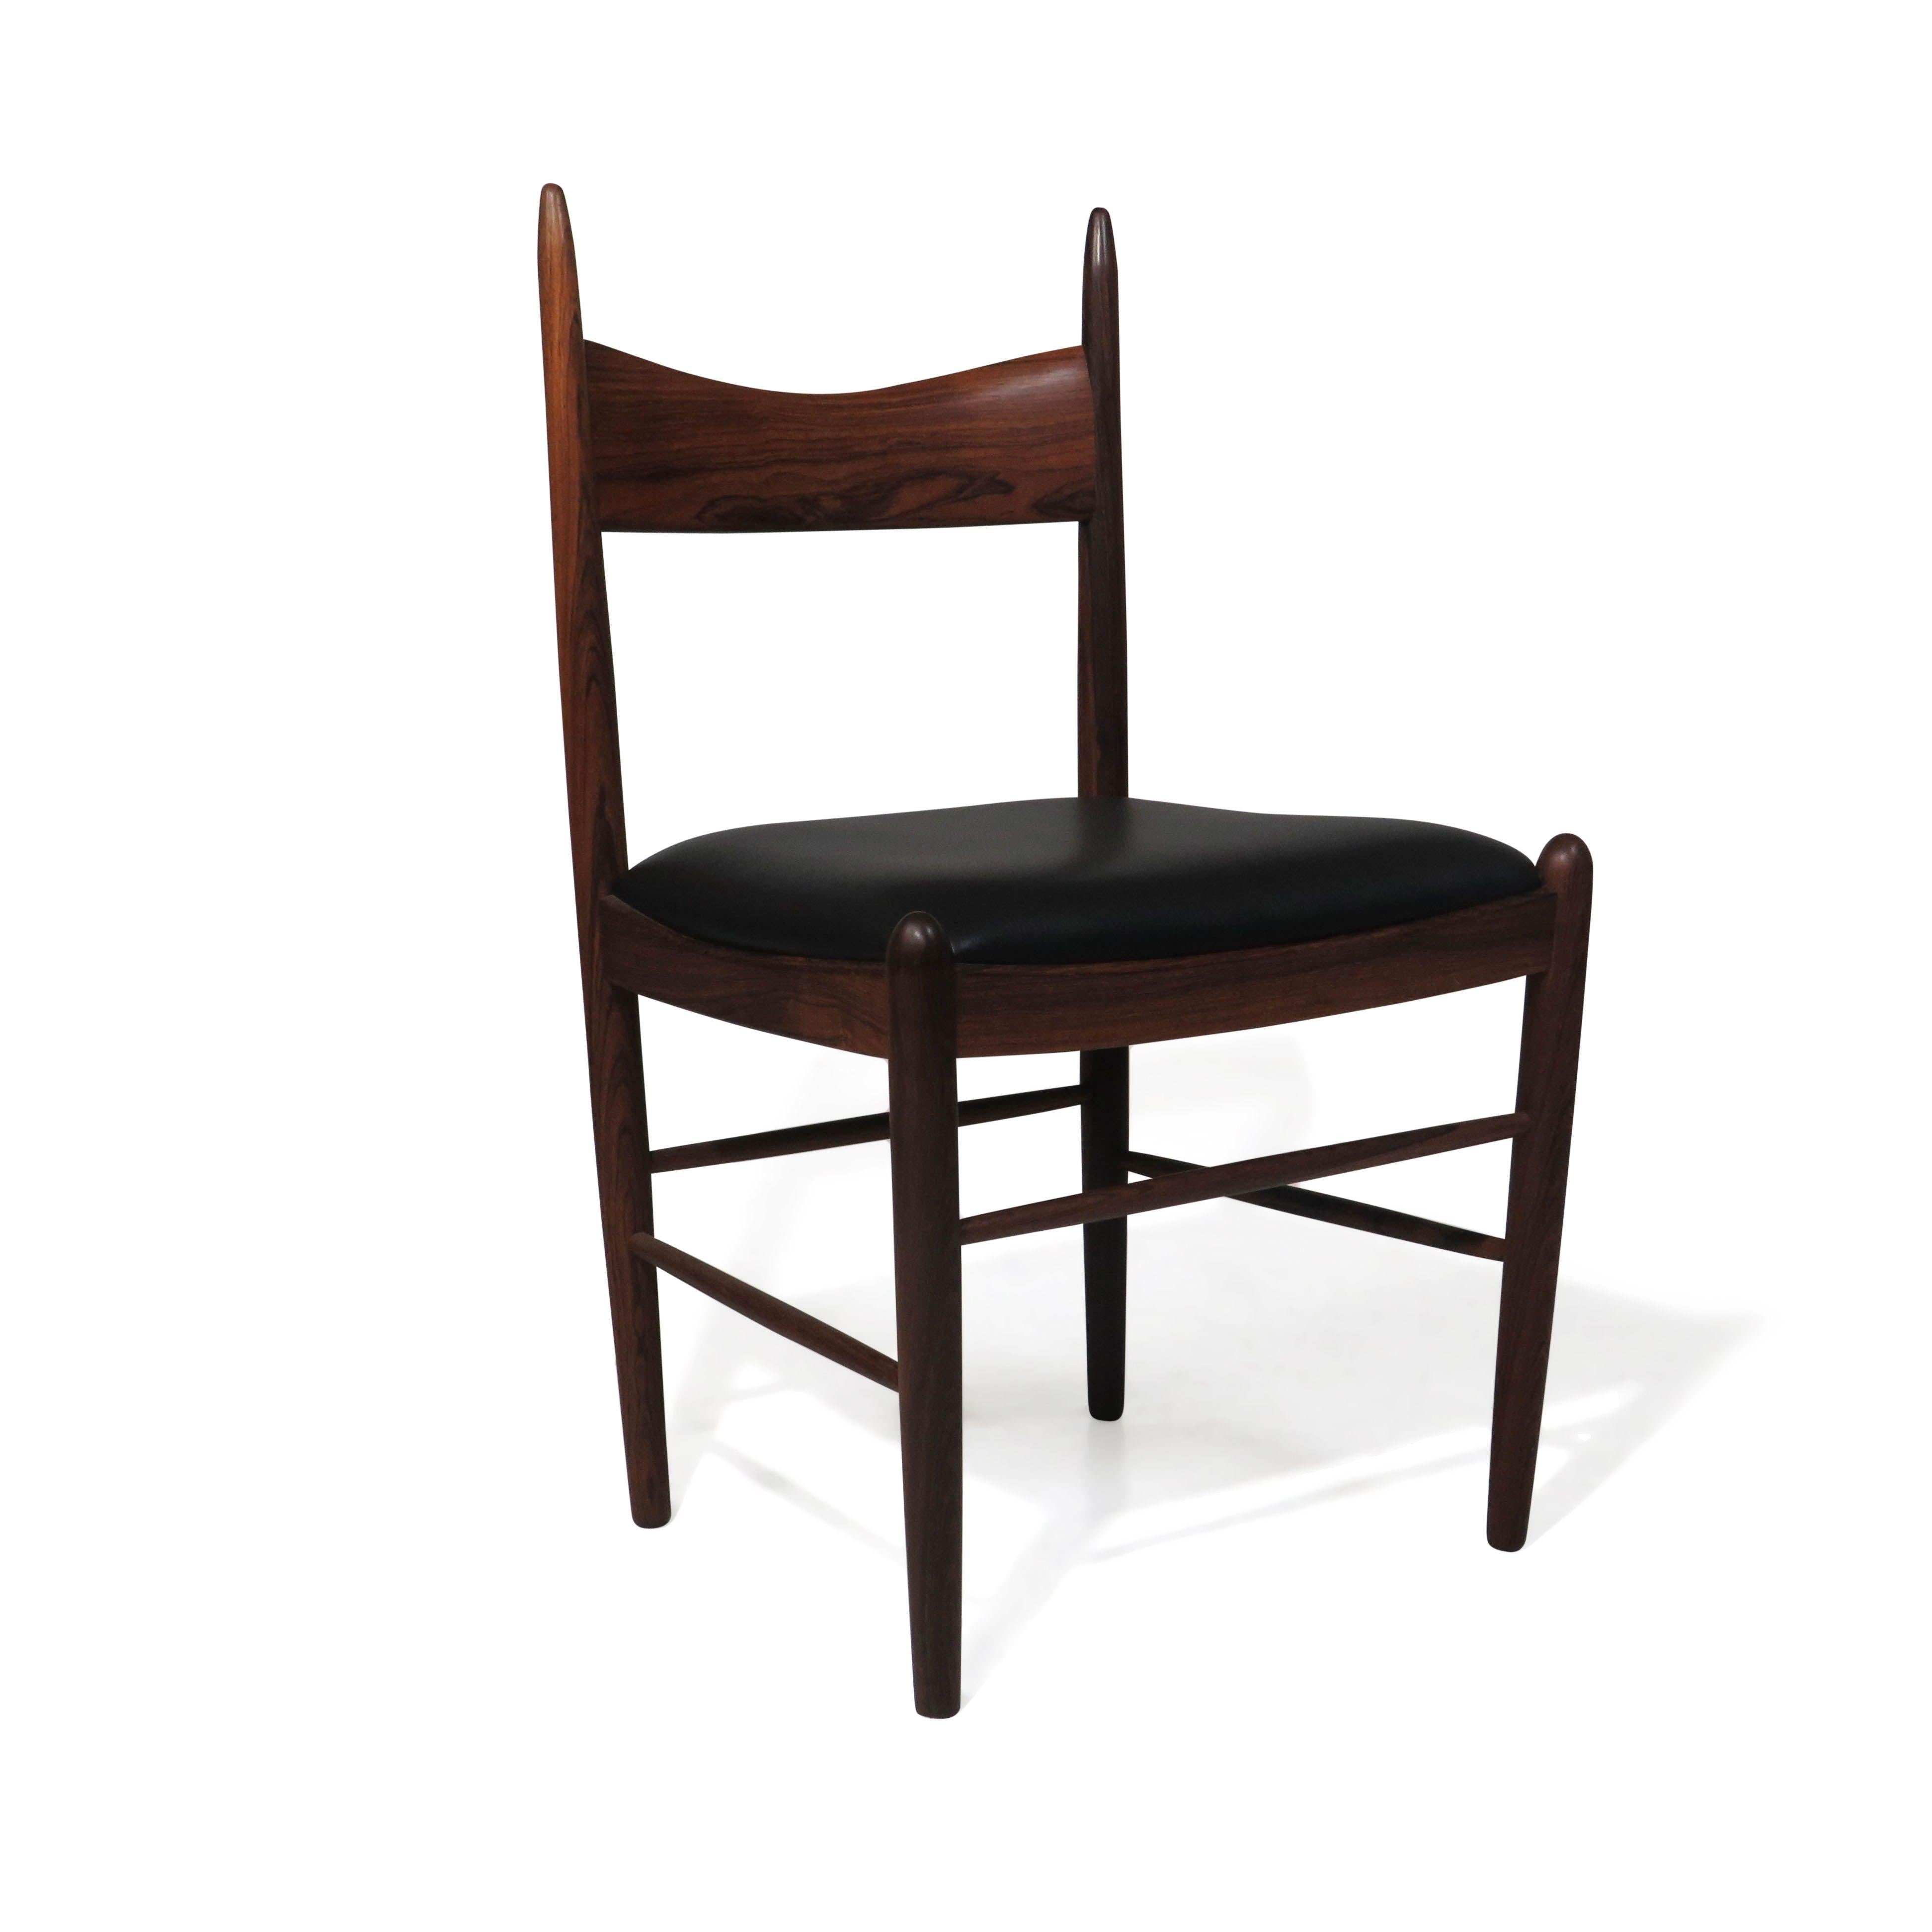 Mid-20th Century Eight Brazilian Rosewood Dining Chairs in New Black Leather